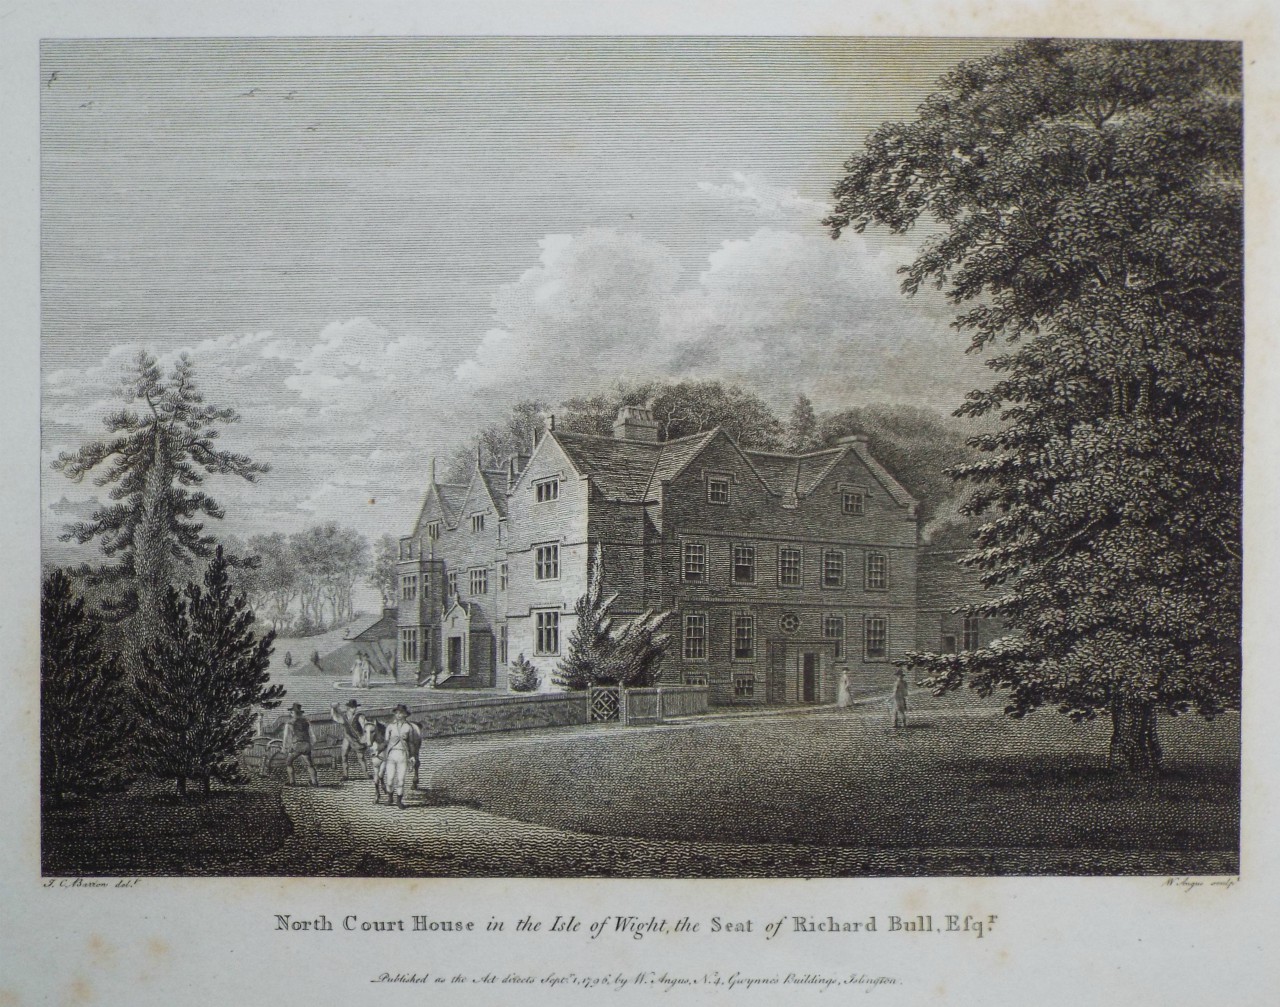 Print - North Court House in the Isle of Wight, the Seat of Richard Bull Esqr. - Angus